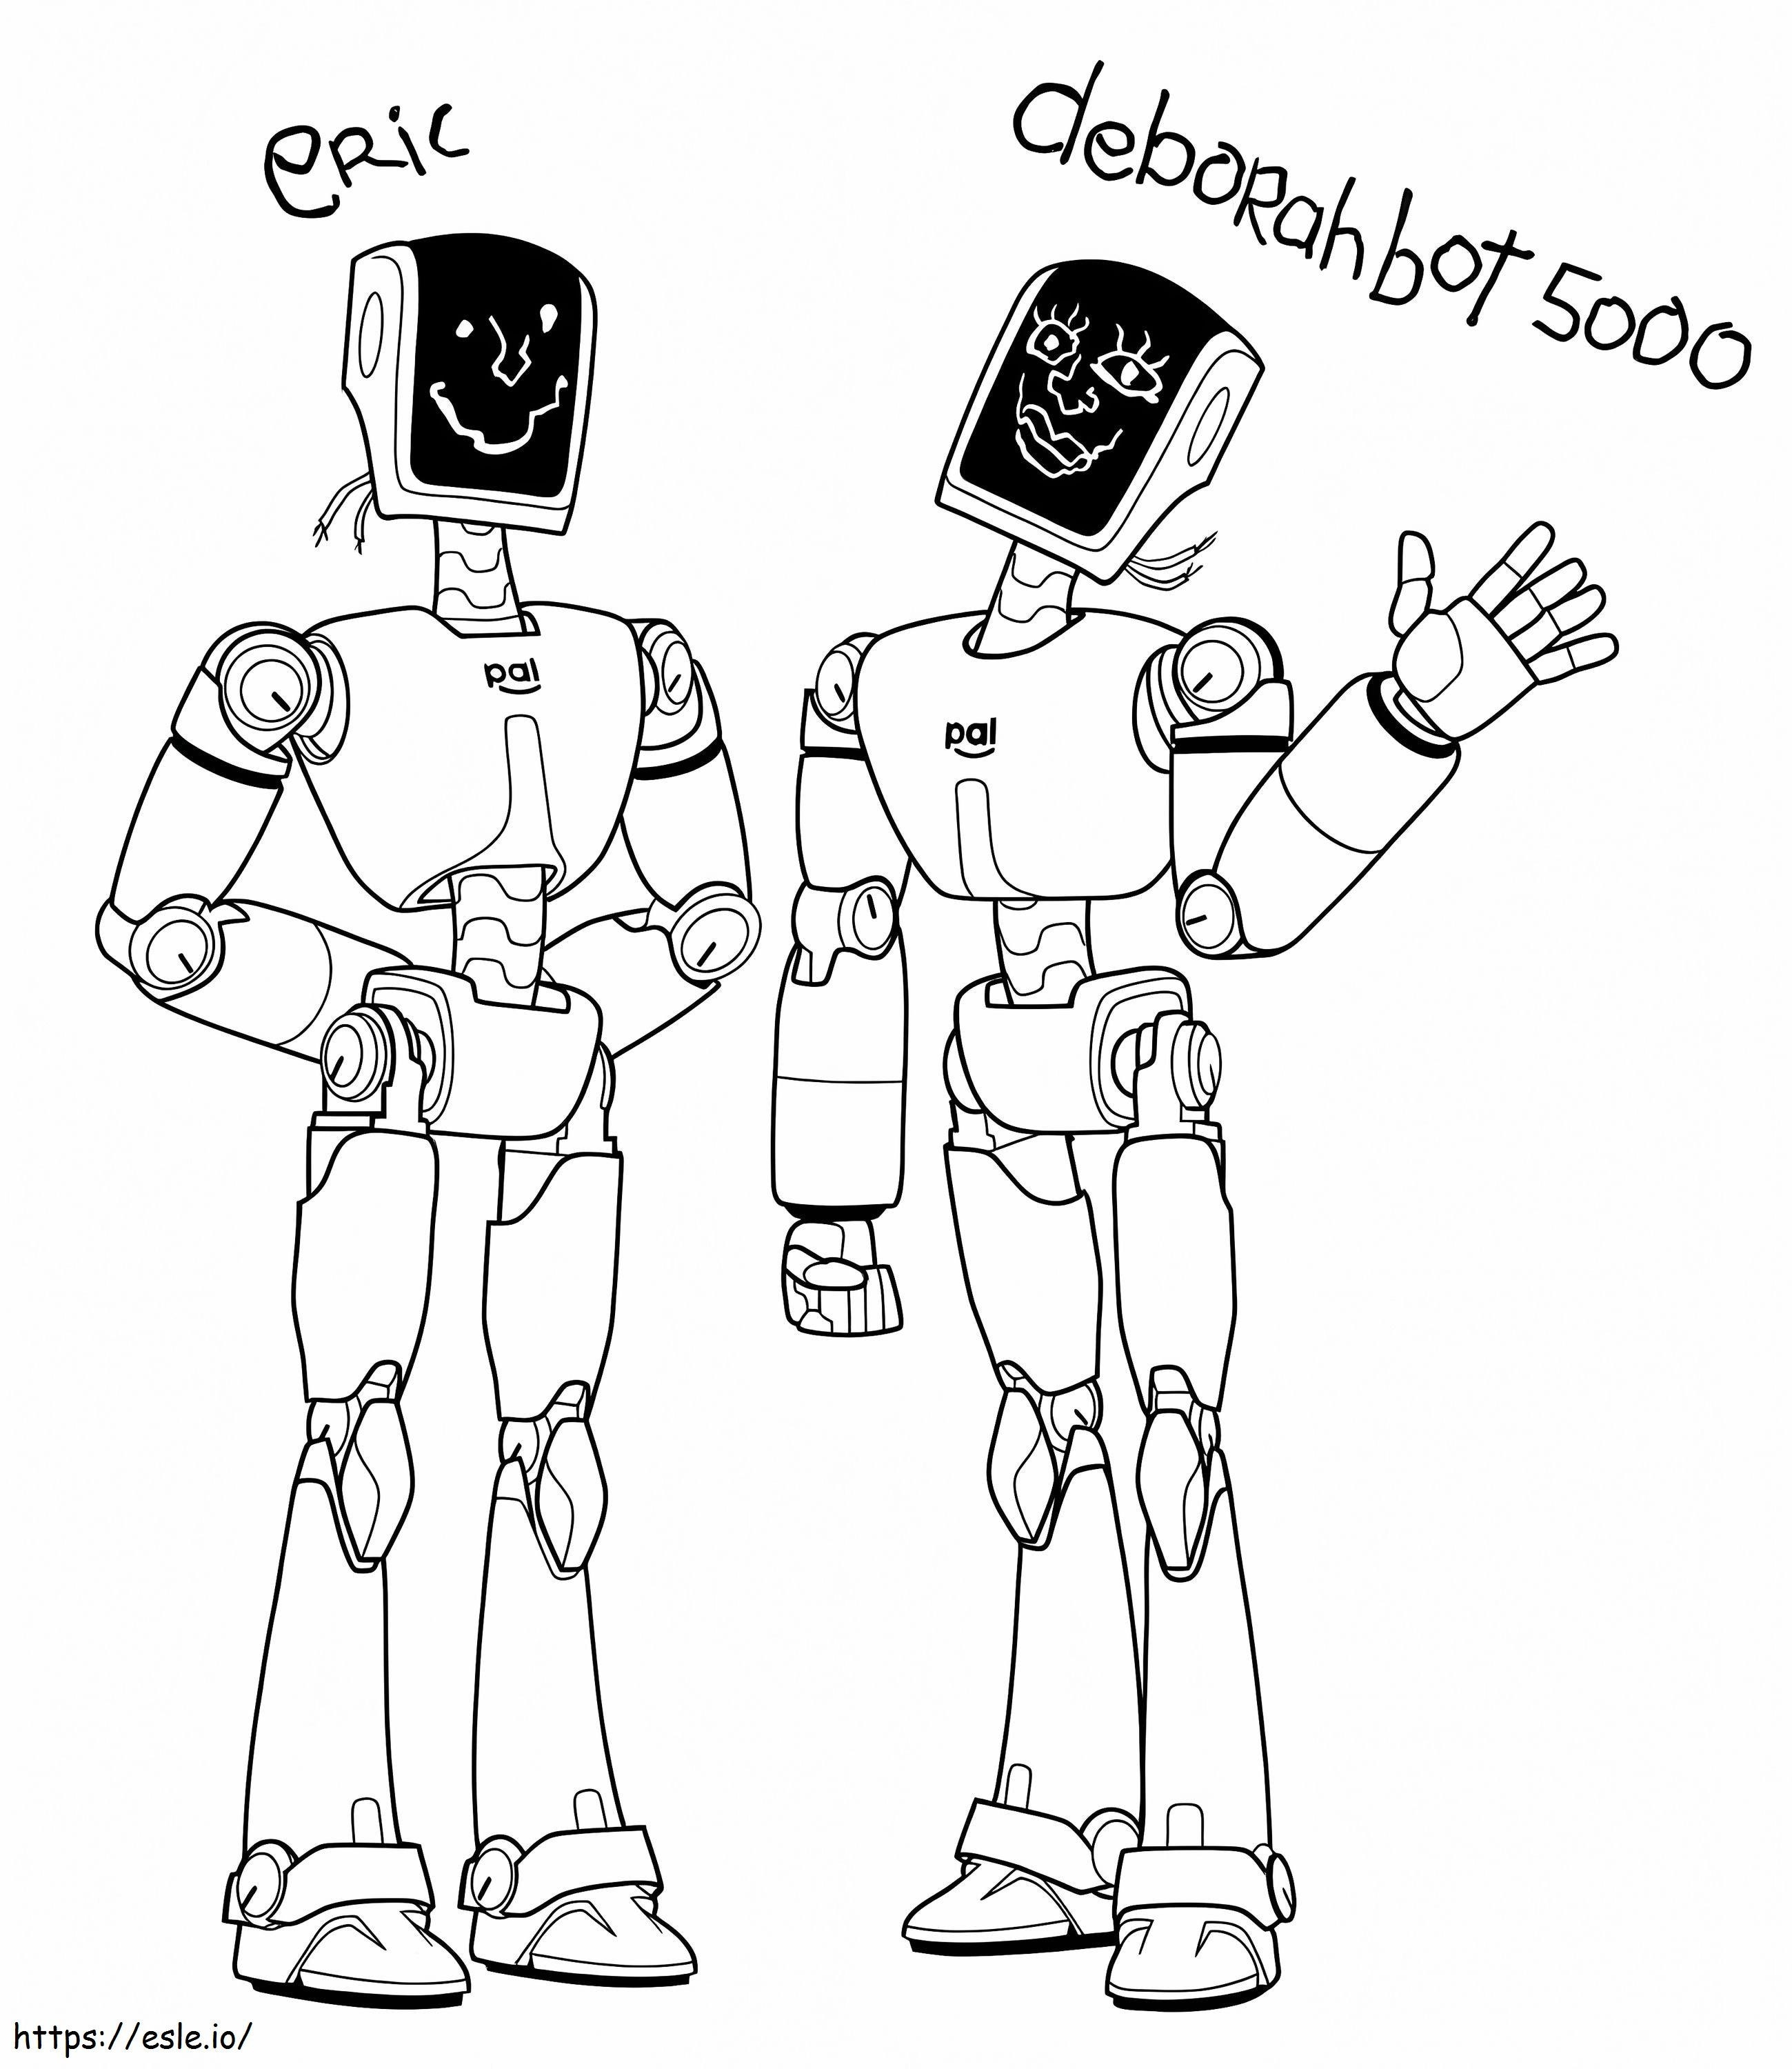 Eric And Deborahbot 5000 coloring page